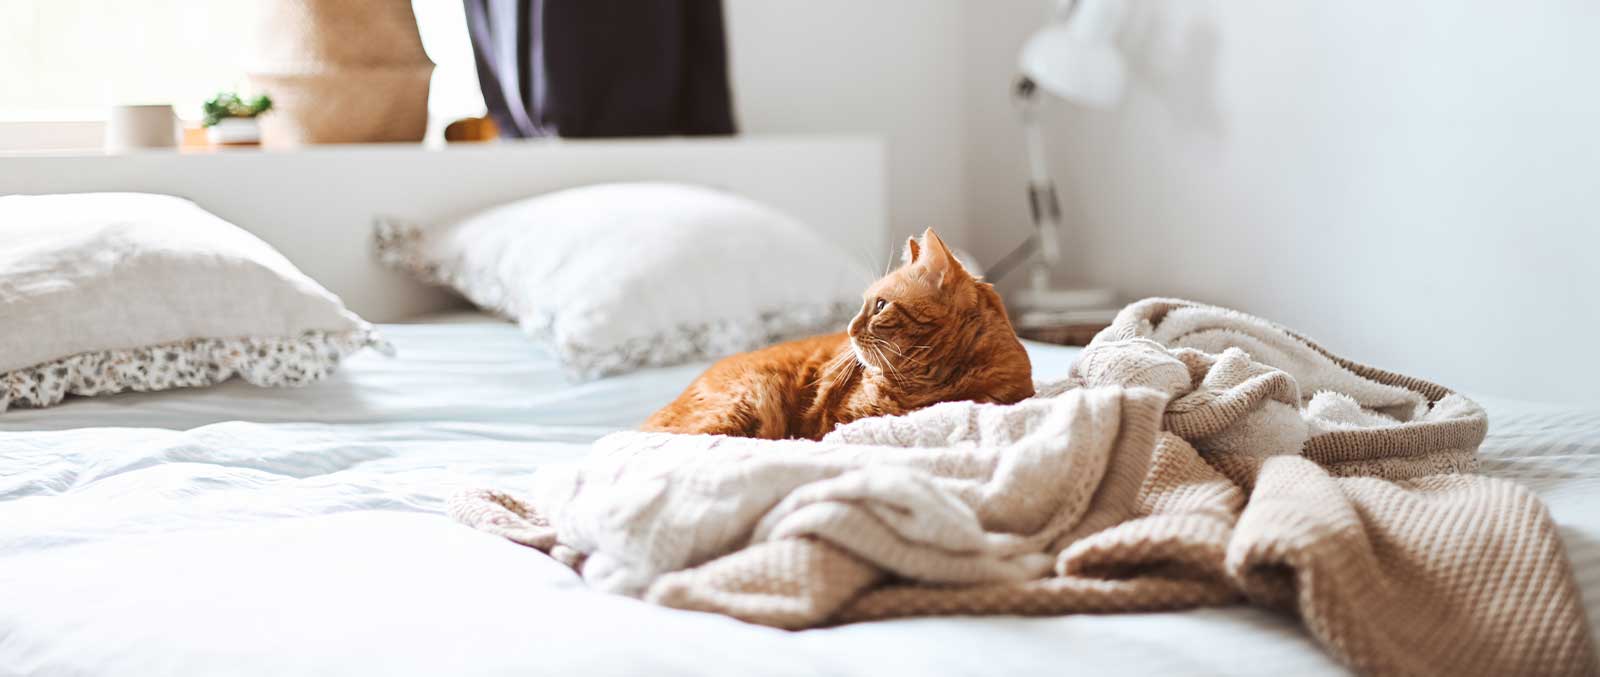 Tabby Cat lying on a white bed with white sheets looking out the window